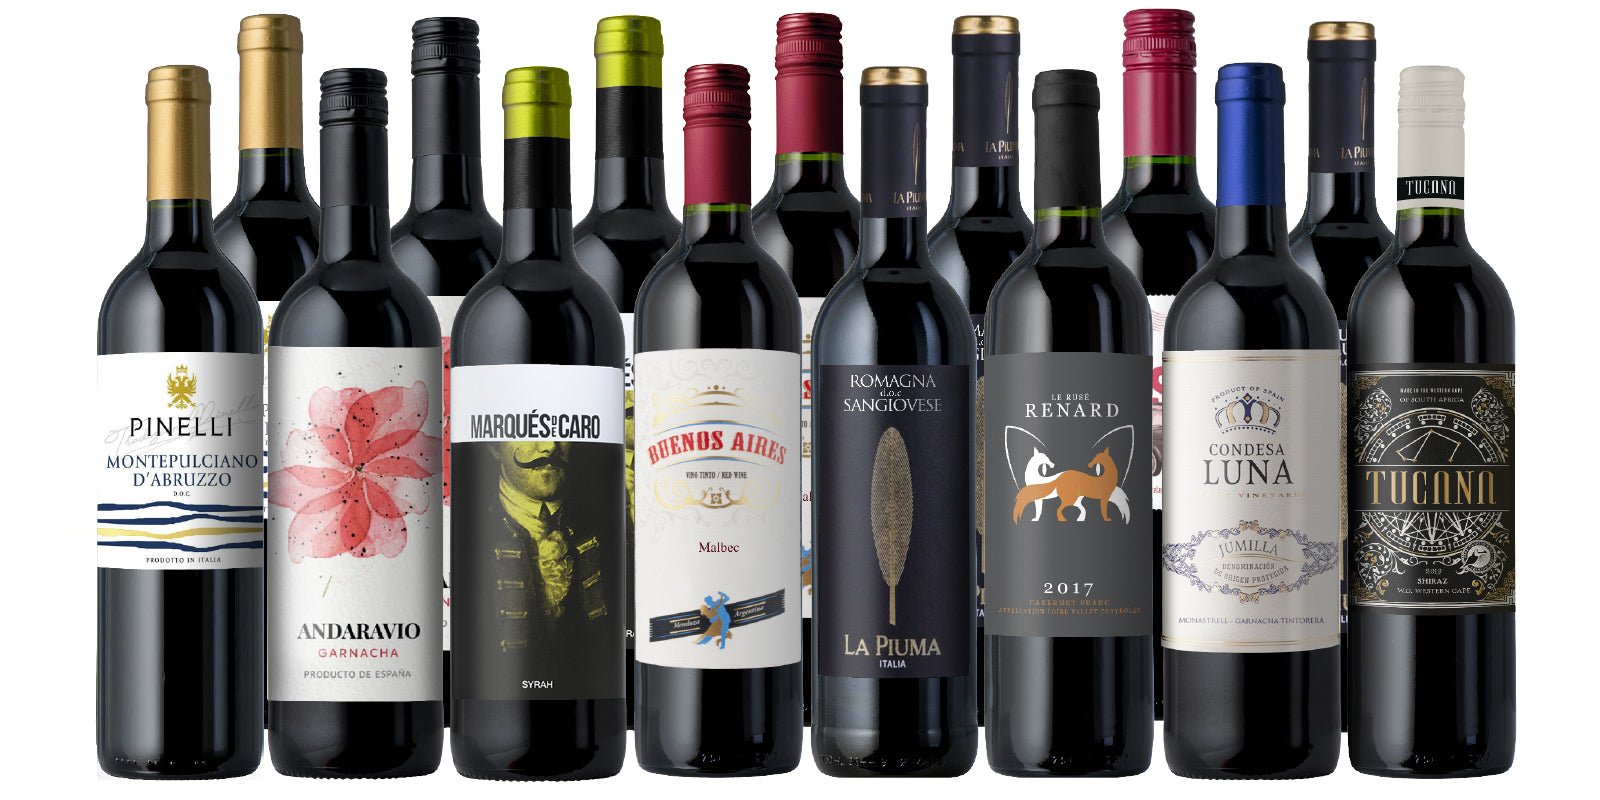 $5.99 Perfect Pizza Wines 15-Pack